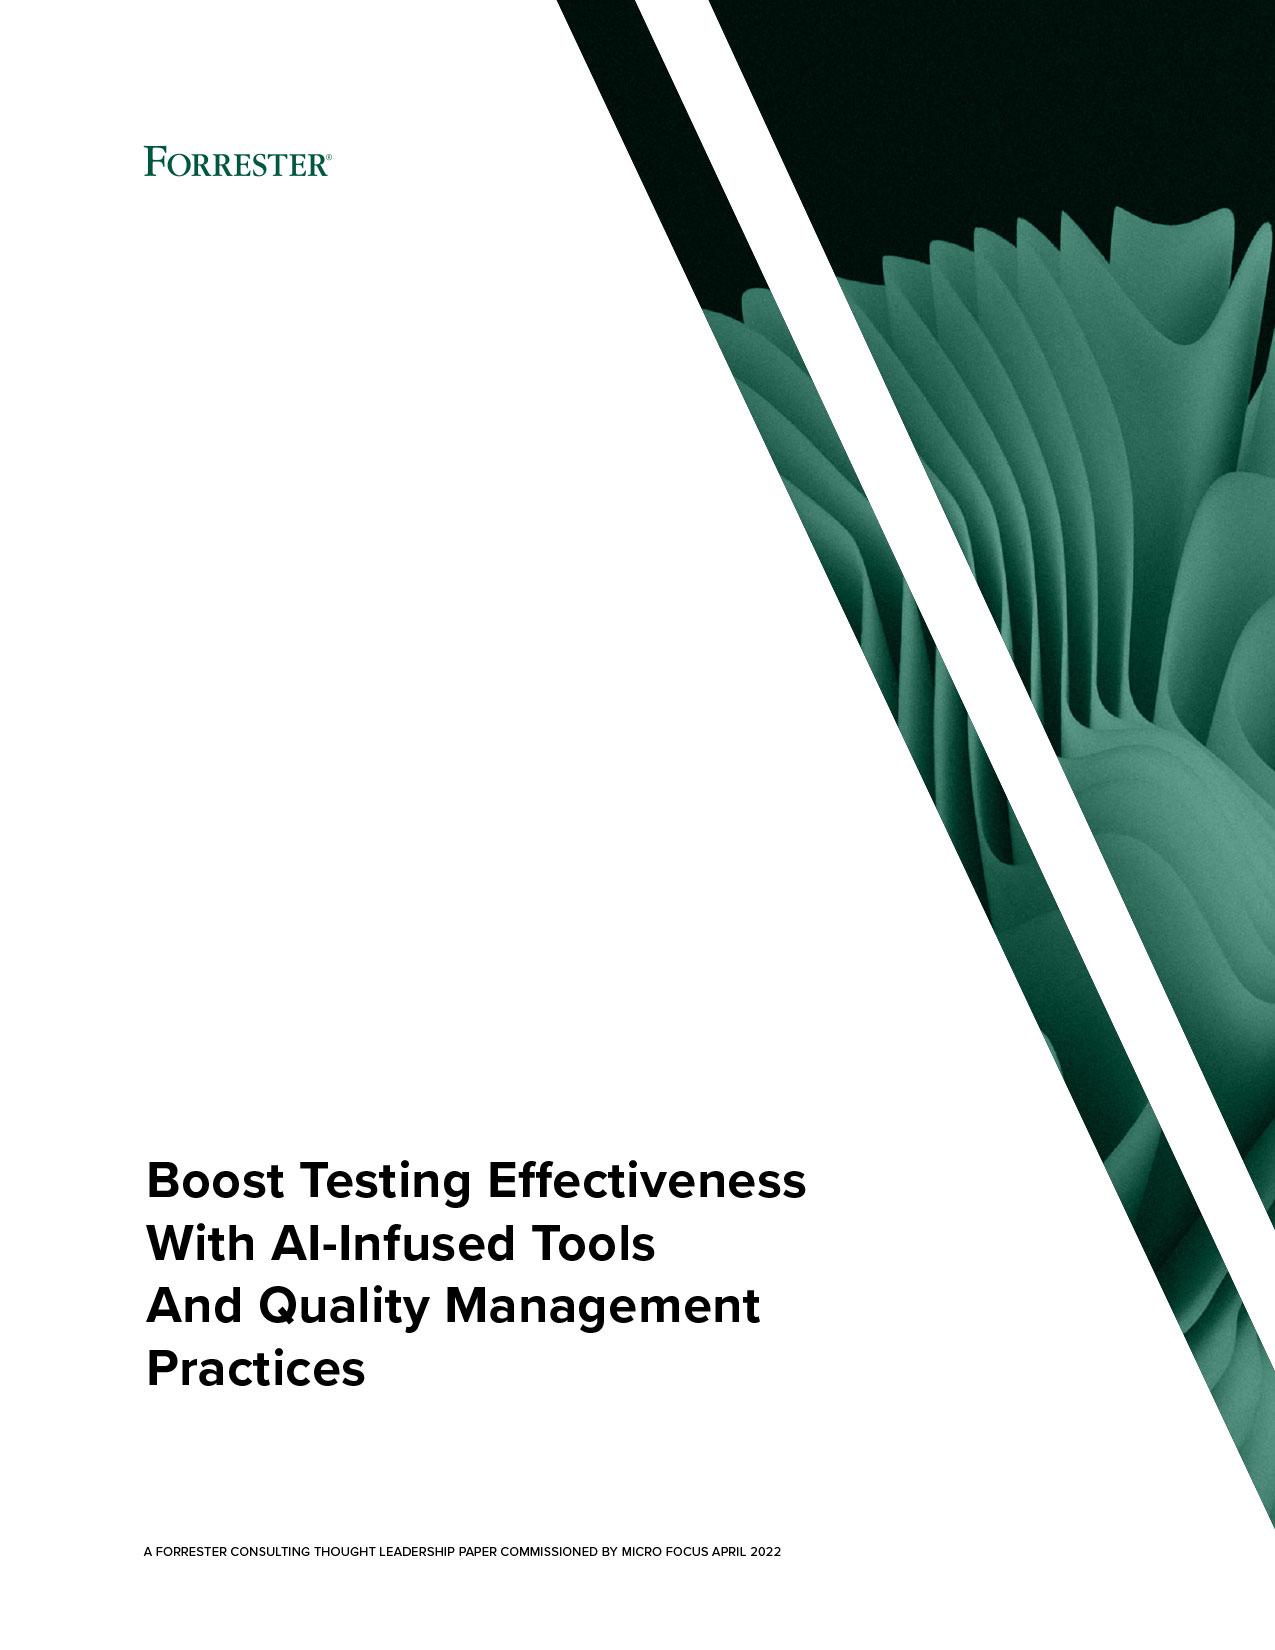 Boost Testing Effectiveness With AI-Infused Tools And Quality Management Practices